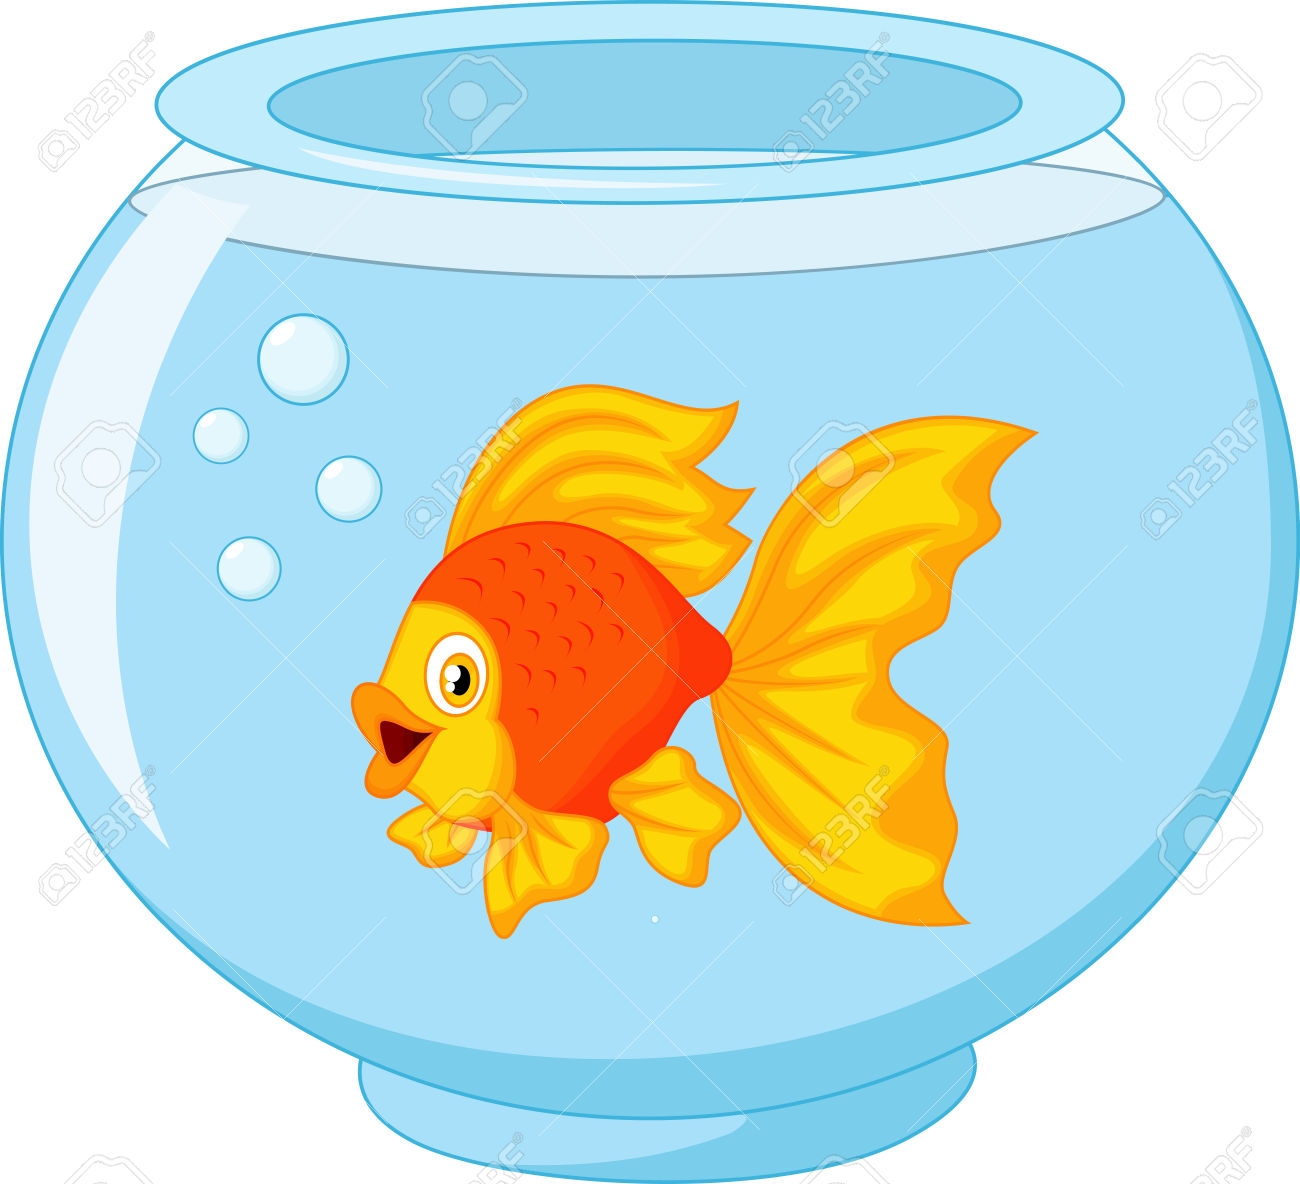 Free fish bowl pictures. Fishbowl clipart